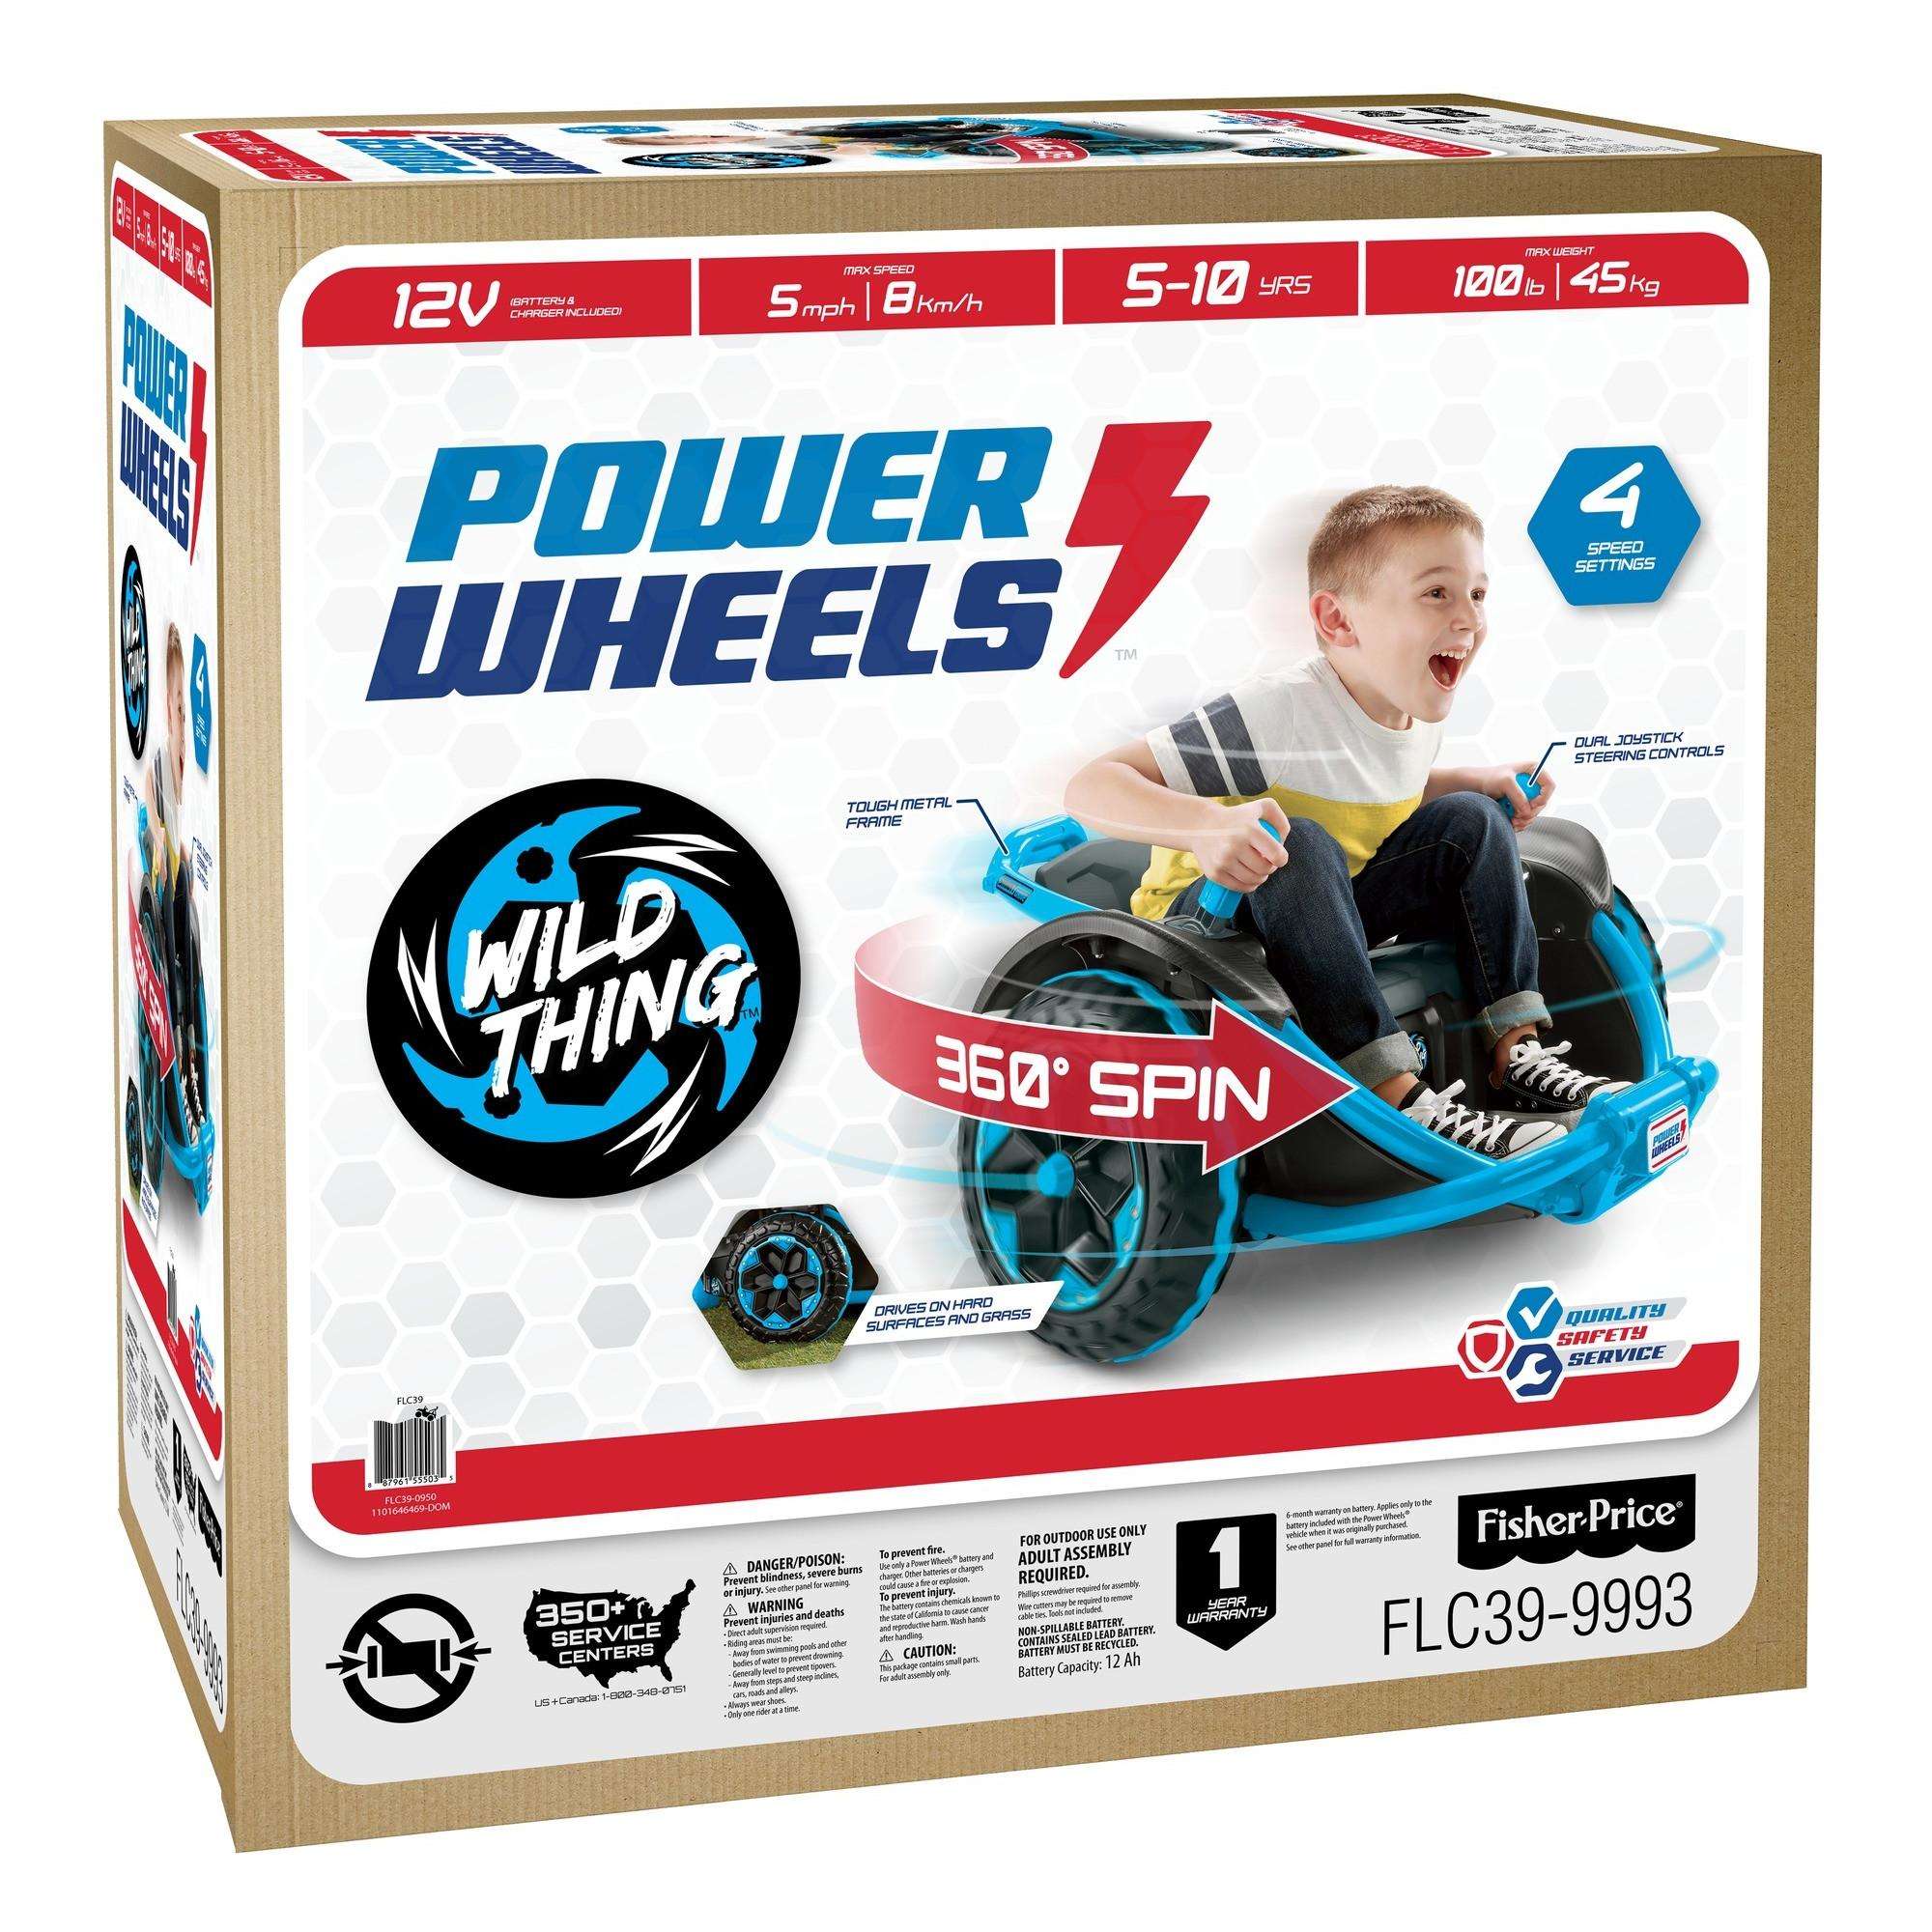 Power Wheels Wild Thing 360 Spinning Ride-On Vehicle, Blue, 12V - image 9 of 10